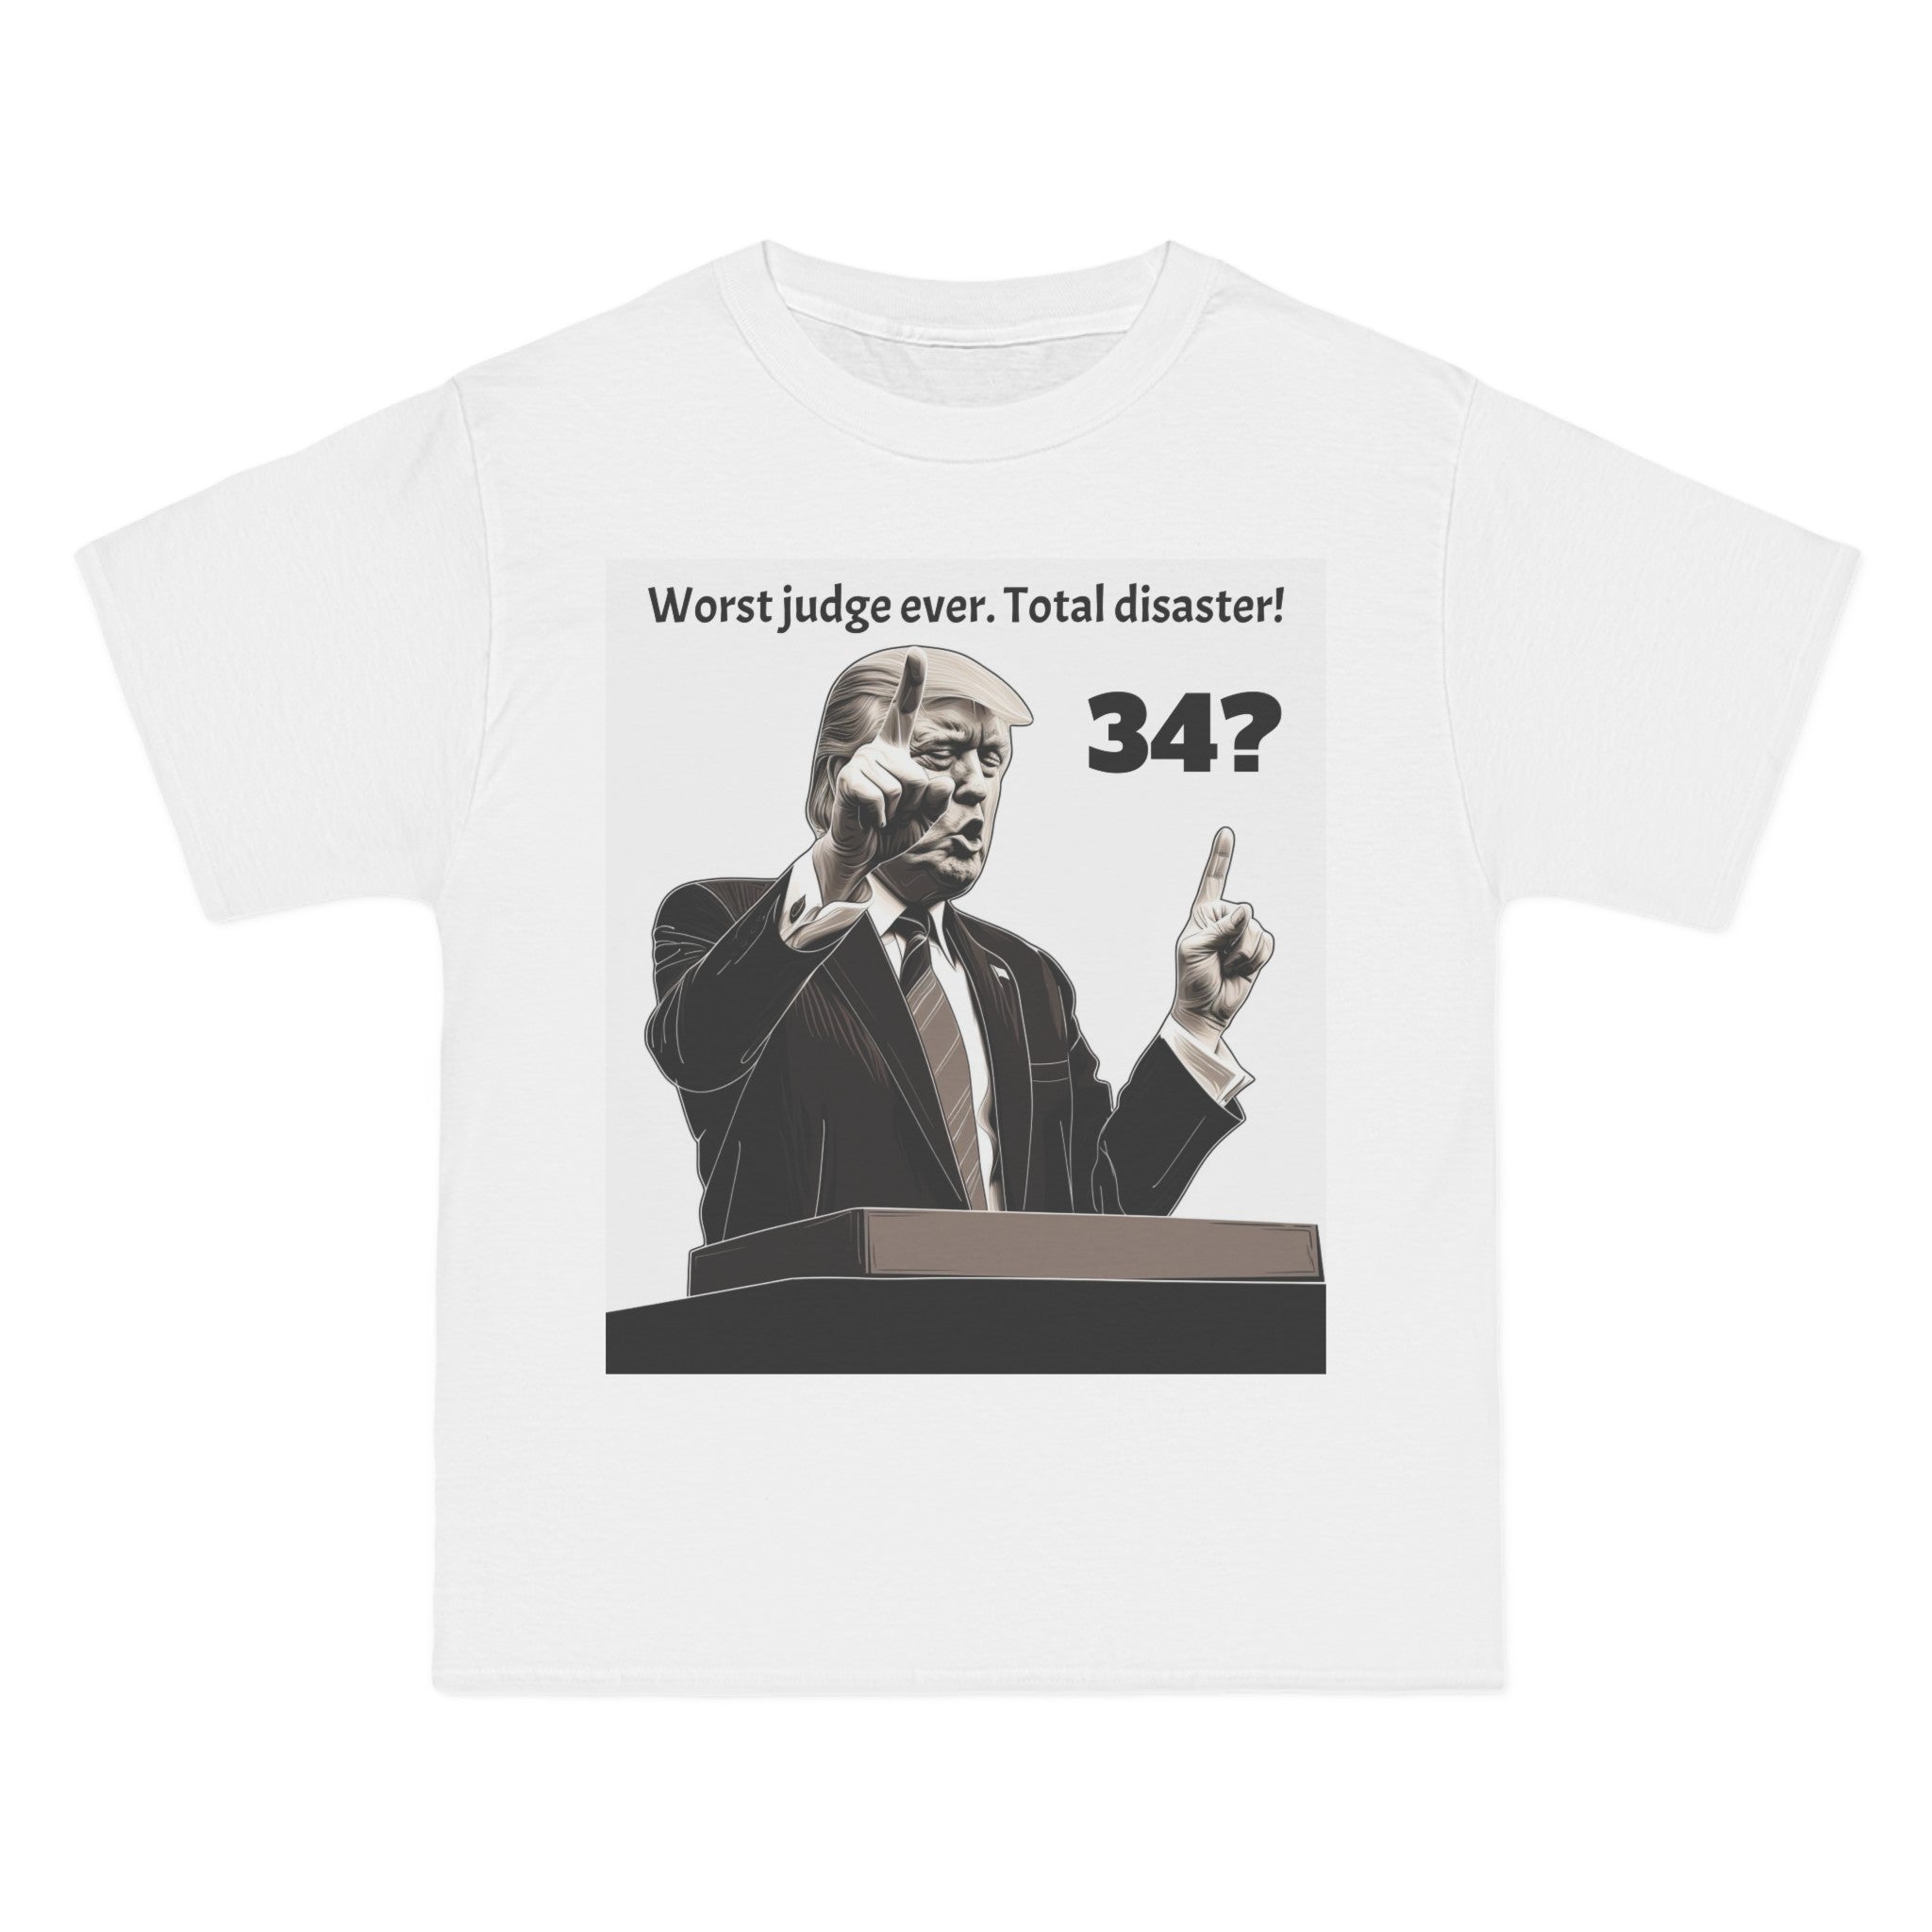 The image displays a robust, comfortable Beefy-T® short-sleeve t-shirt in a classic color. The front is emblazoned with the phrase "34 Counts? Worst Judge Ever" in bold, attention-grabbing typography, reflecting a satirical take on political narratives. The shirt’s quality and fit are highlighted, promising both style and comfort for the politically aware.